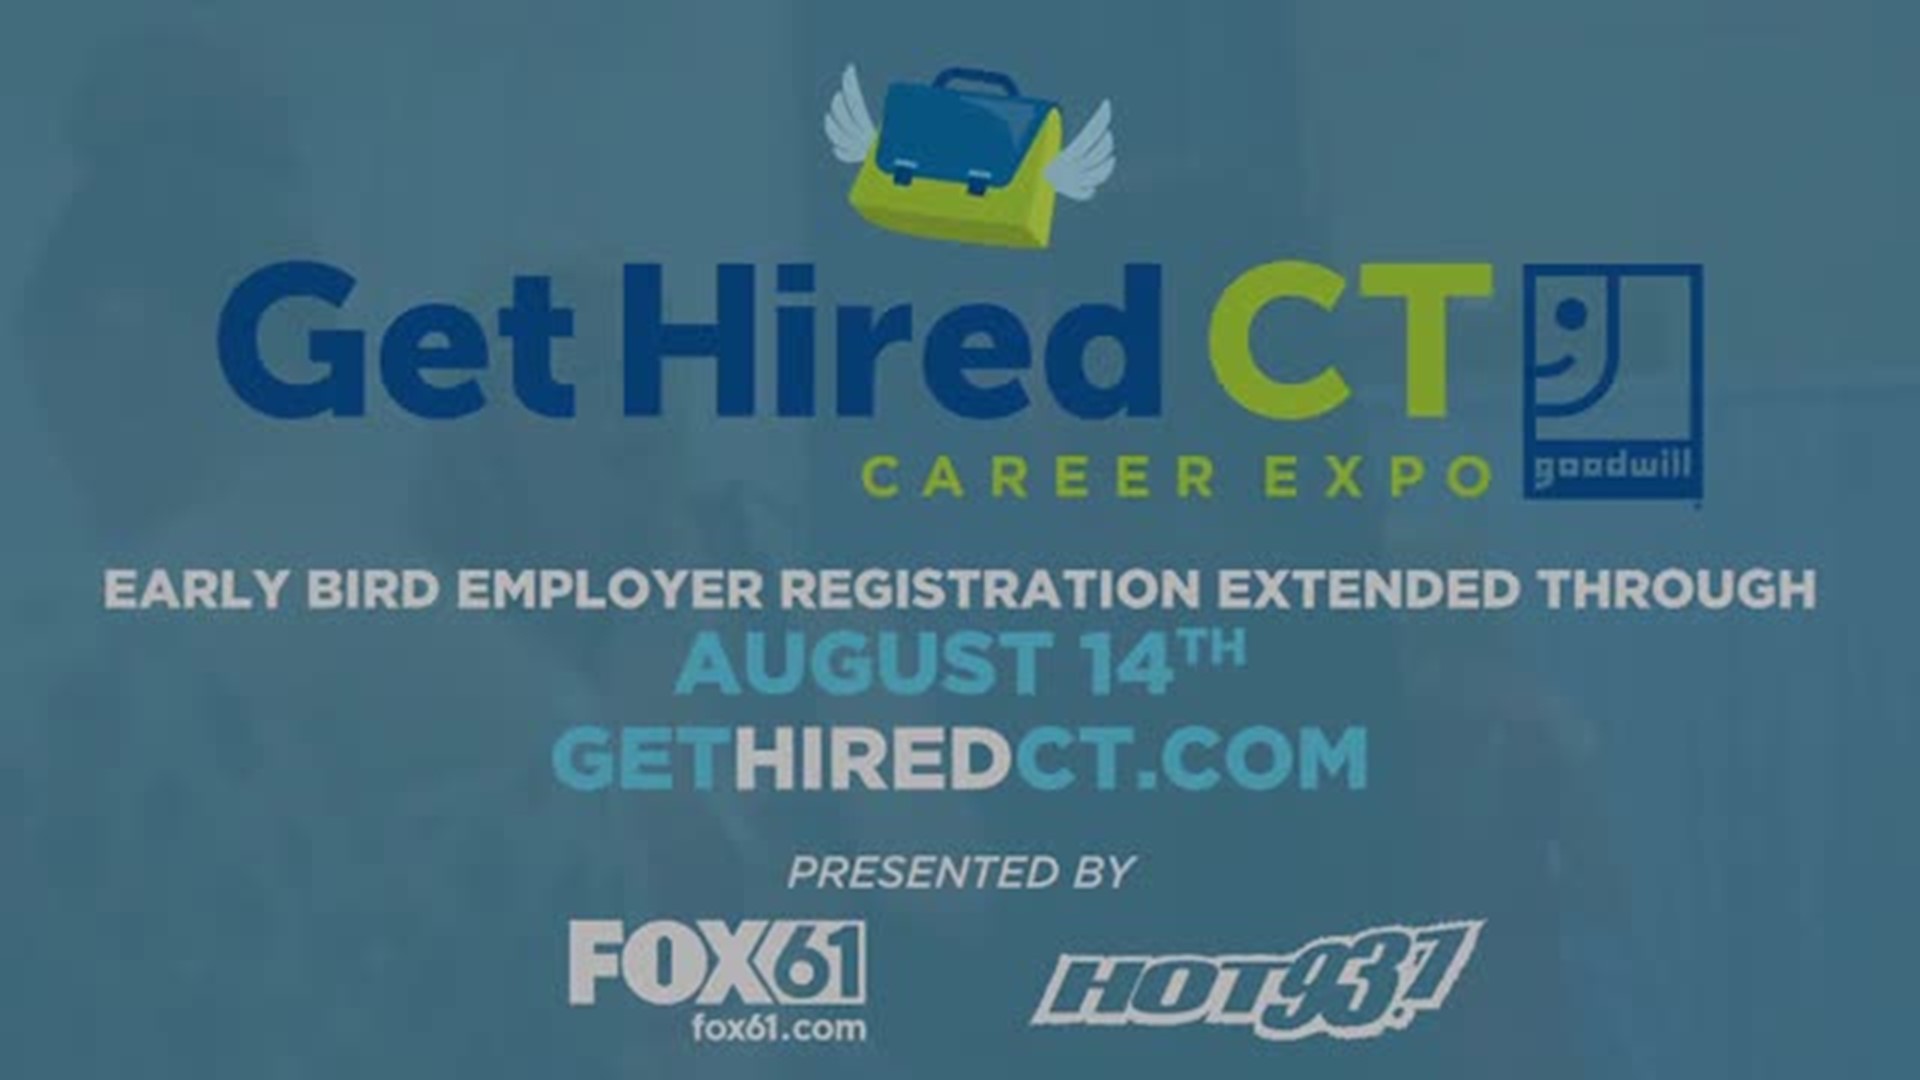 Goodwill Get Hired CT Employer ext registration